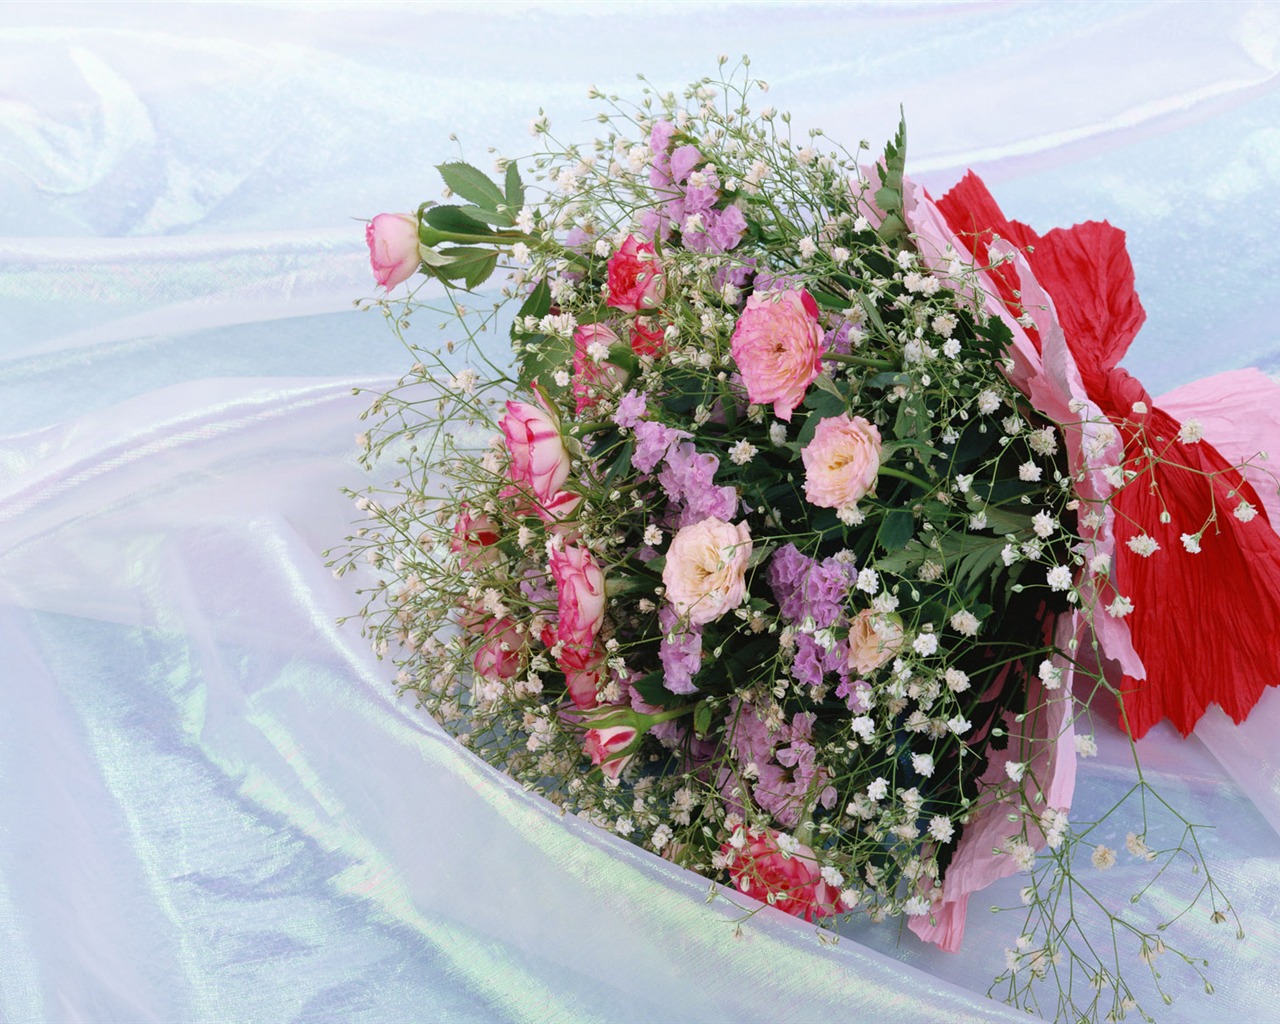 Weddings and Flowers wallpaper (2) #14 - 1280x1024